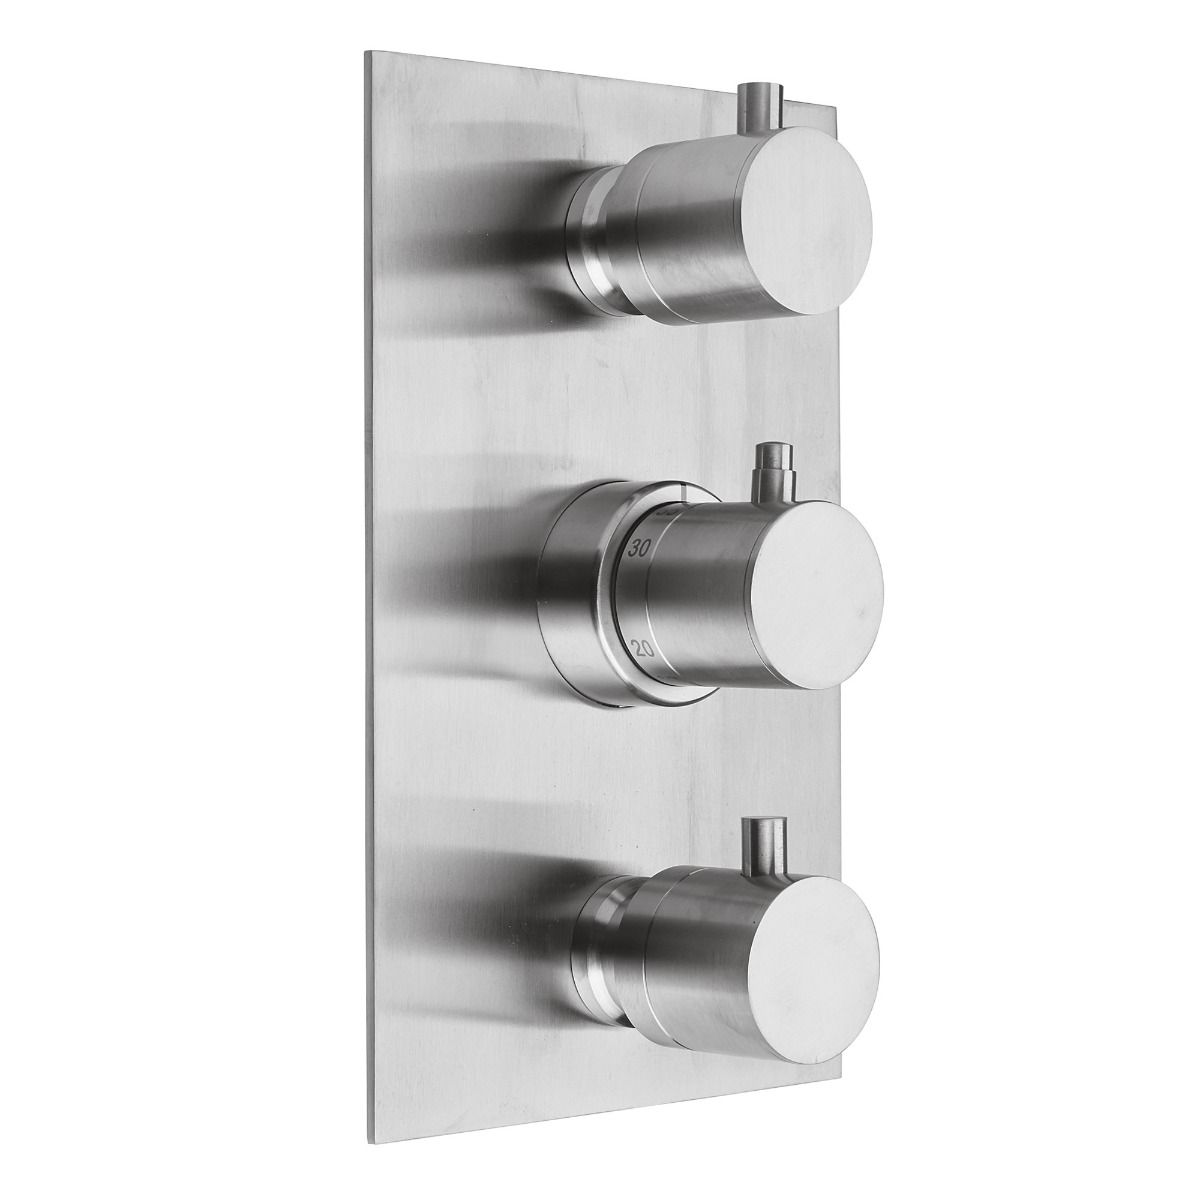 Concealed Dual Control Shower with 2 Valves